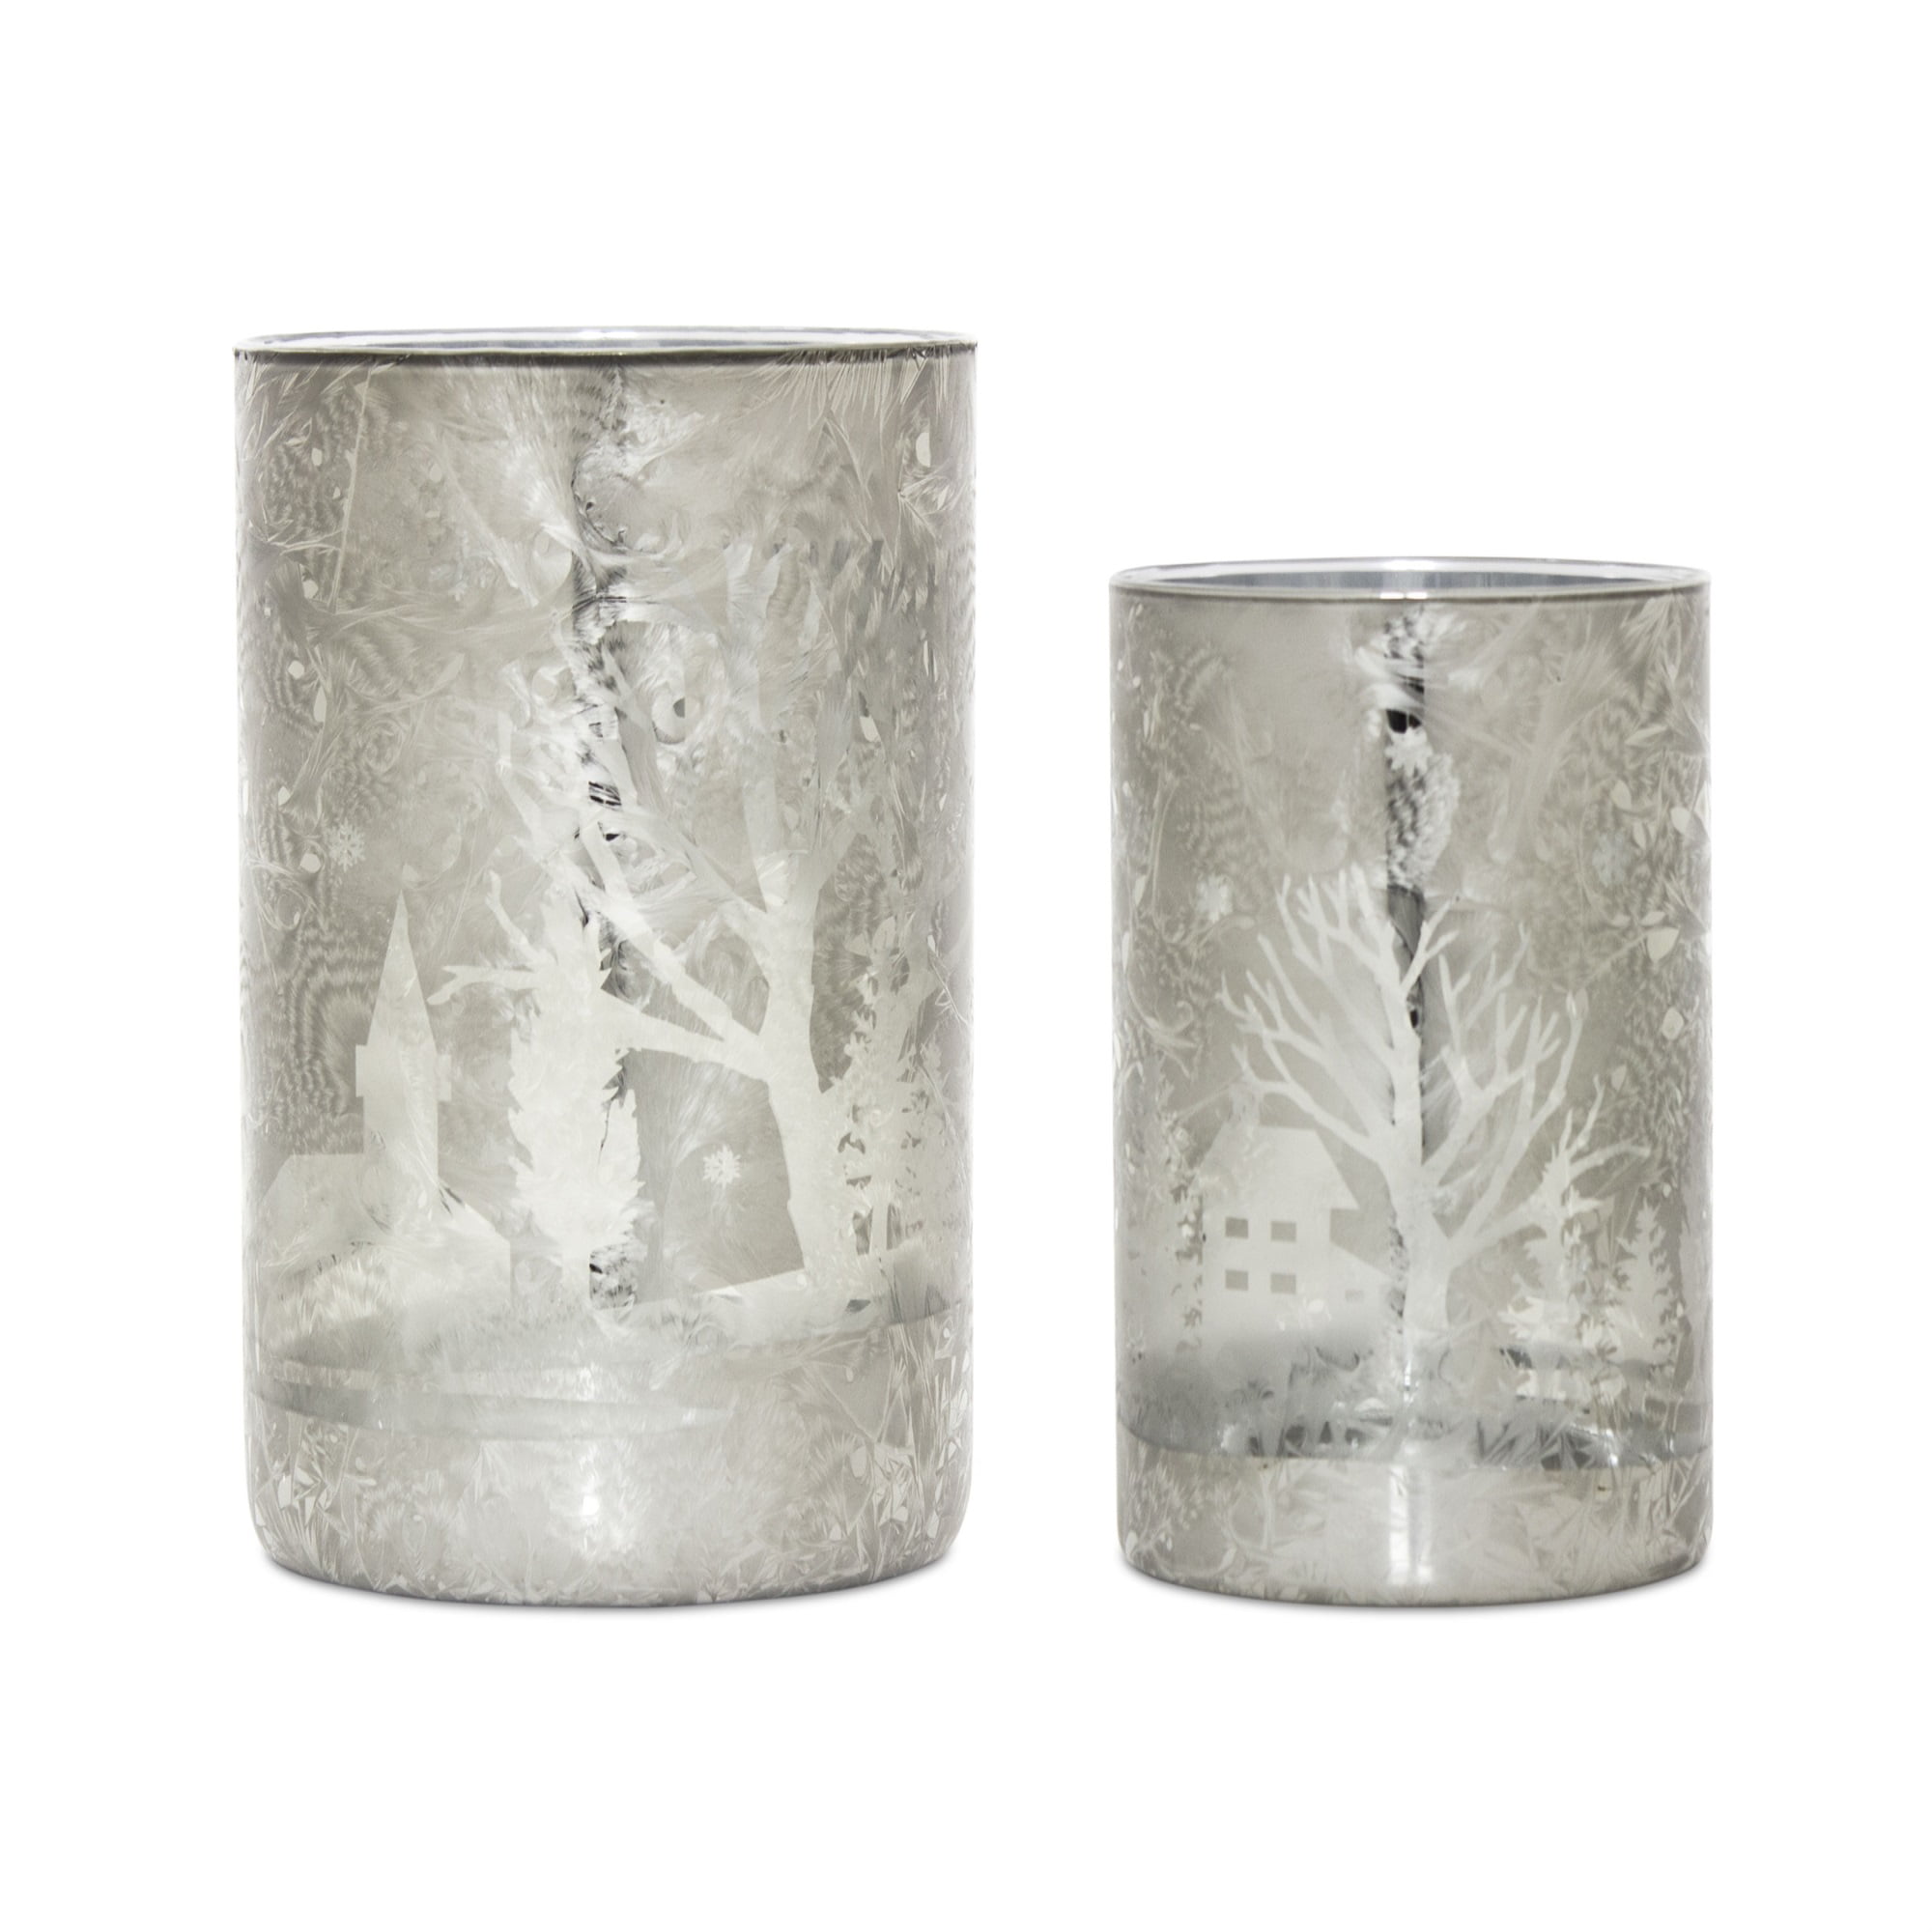 Tree and House Votive Holder (Set of 2) 6.5"H, 7.75"H Glass